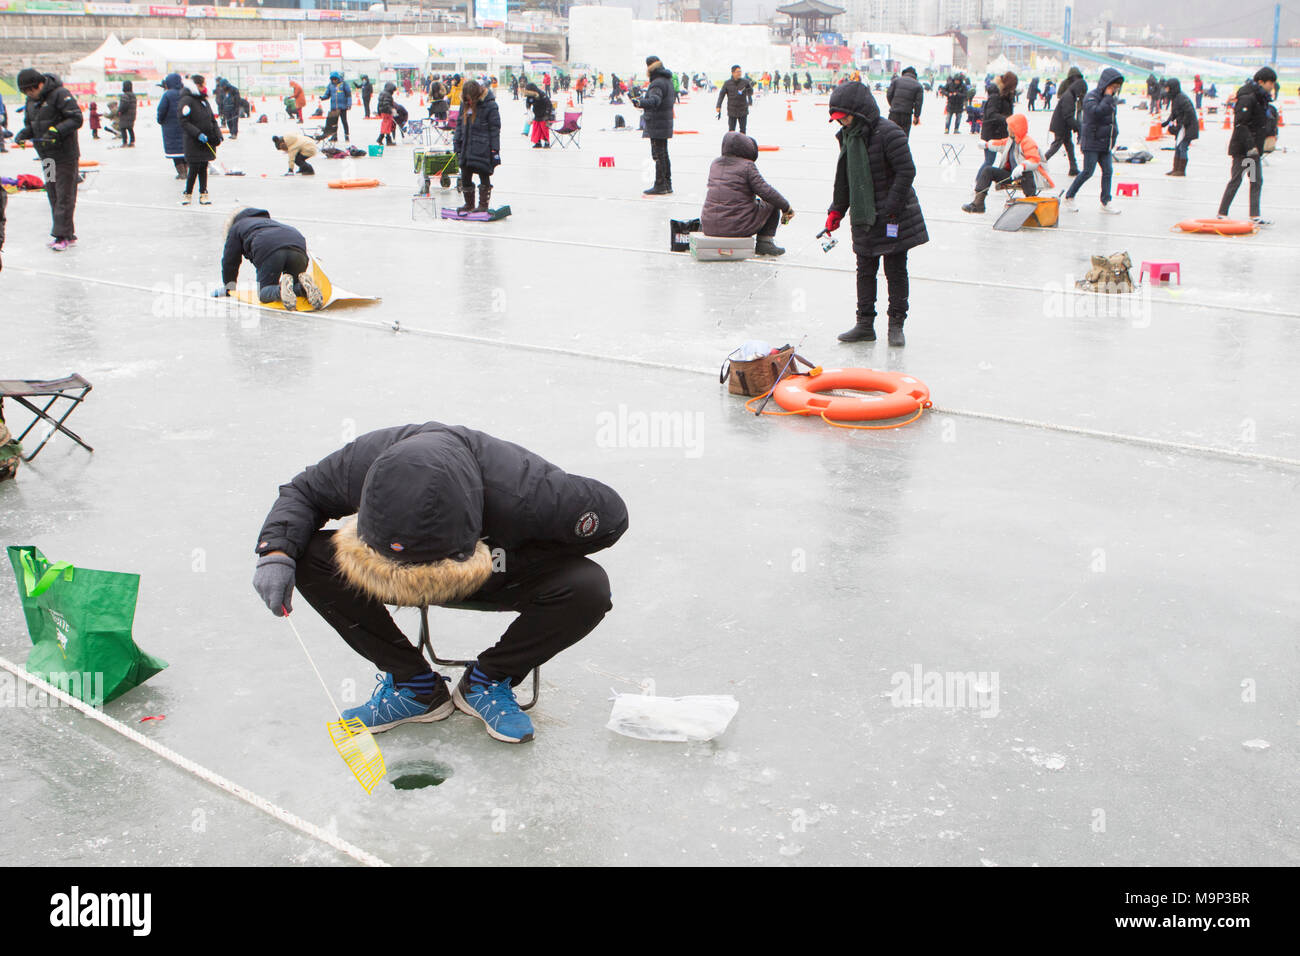 People are waiting above a hole in the ice during the ice fishing festival at Hwacheon Sancheoneo in the Gangwon-do region of South Korea.  The Hwacheon Sancheoneo Ice Festival is a tradition for Korean people. Every year in January crowds gather at the frozen river to celebrate the cold and snow of winter. Main attraction is ice fishing. Young and old wait patiently over a small hole in the ice for a trout to bite. In tents they can let the fish grilled after which they are eaten. Among other activities are sledding and ice skating.  The nearby Pyeongchang region will host the Winter Stock Photo